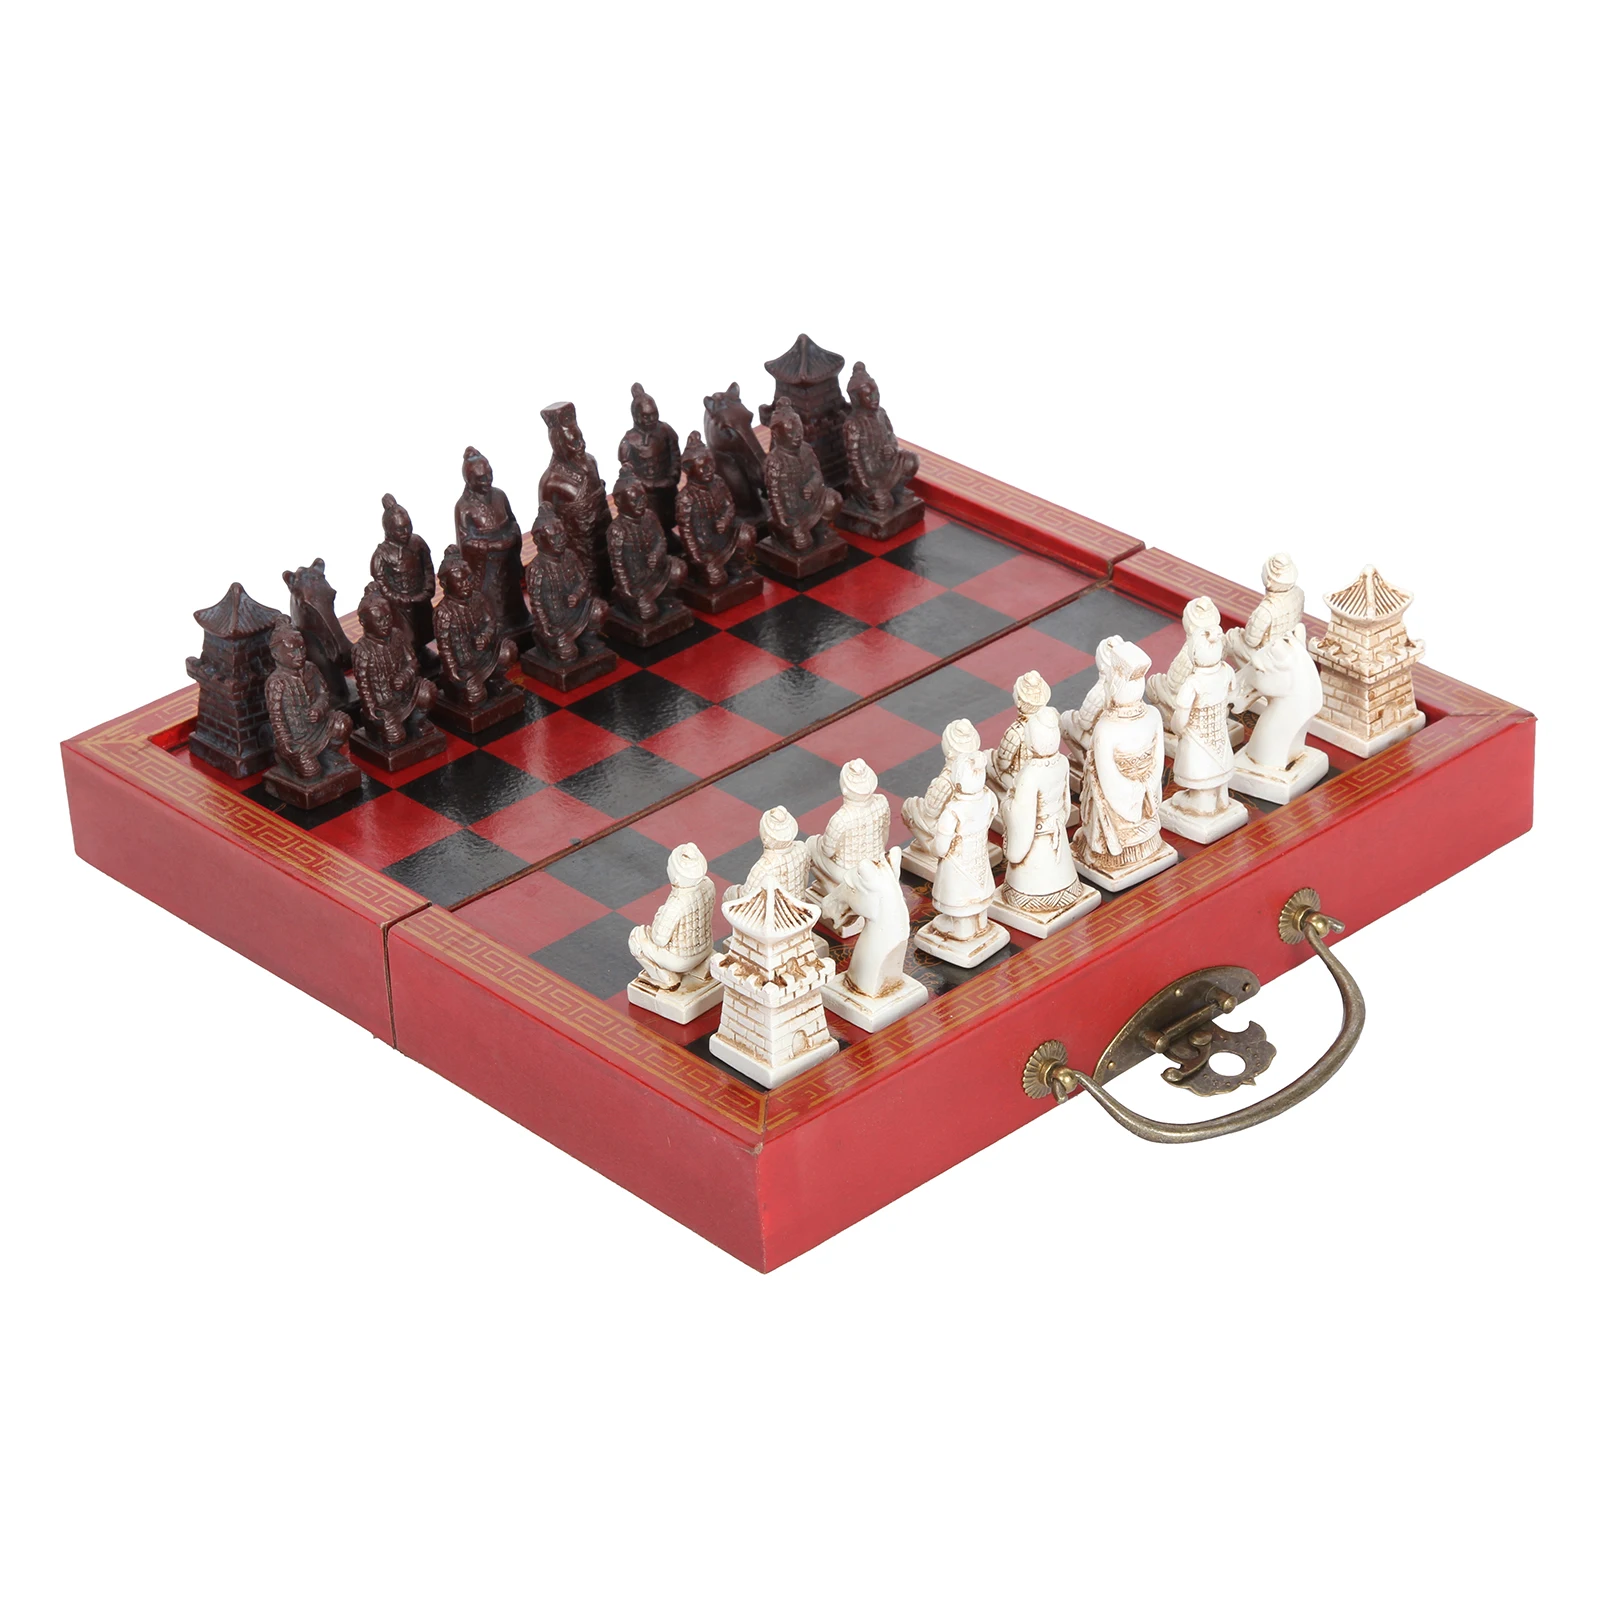 Antique Chess Set Board Terracotta Army Wood Carved Unique Vintage Collectible 